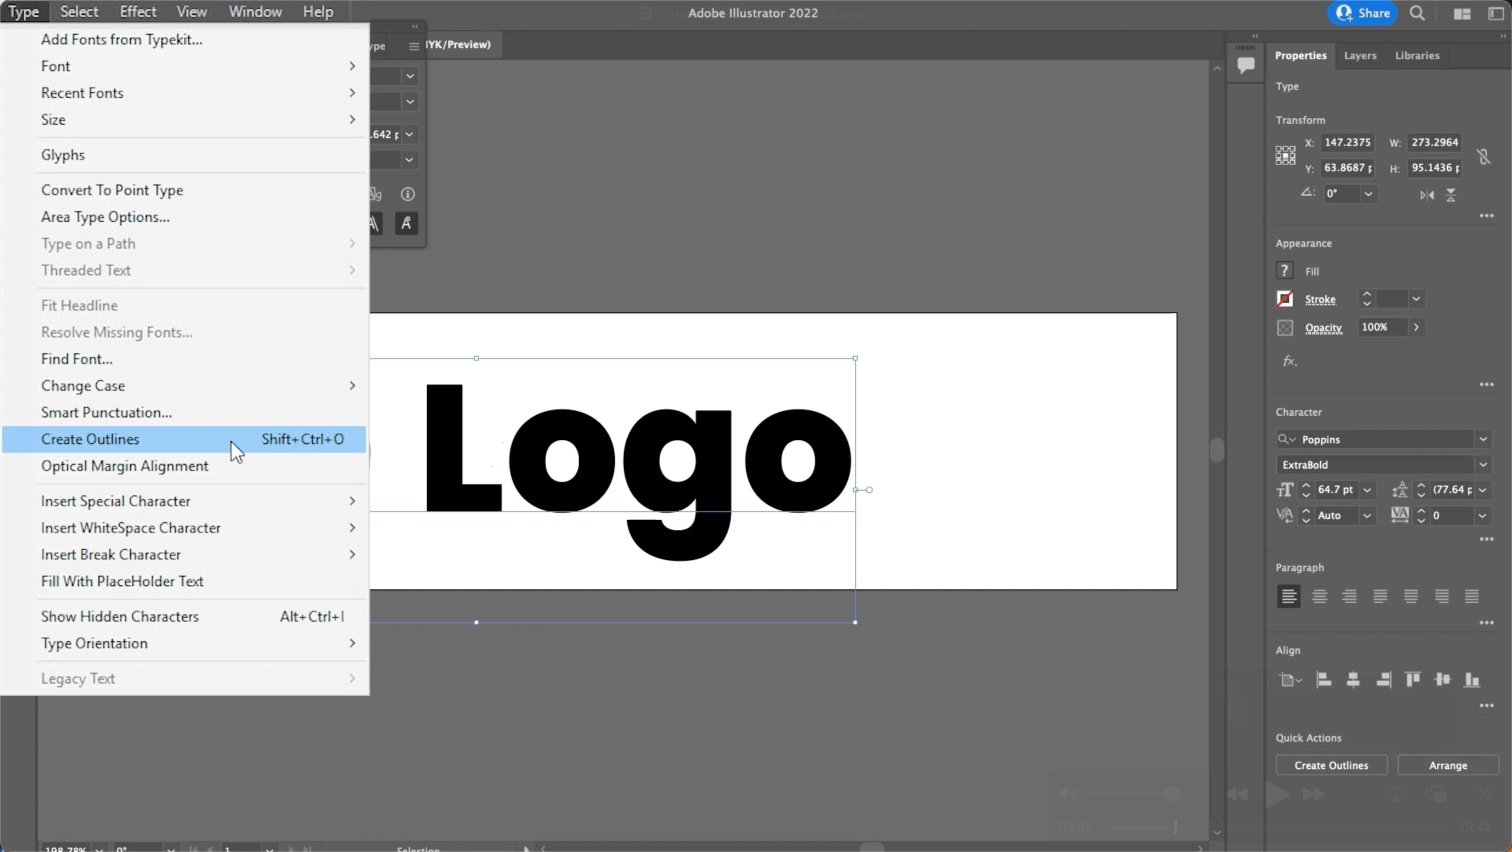 Turn text into paths in Illustrator